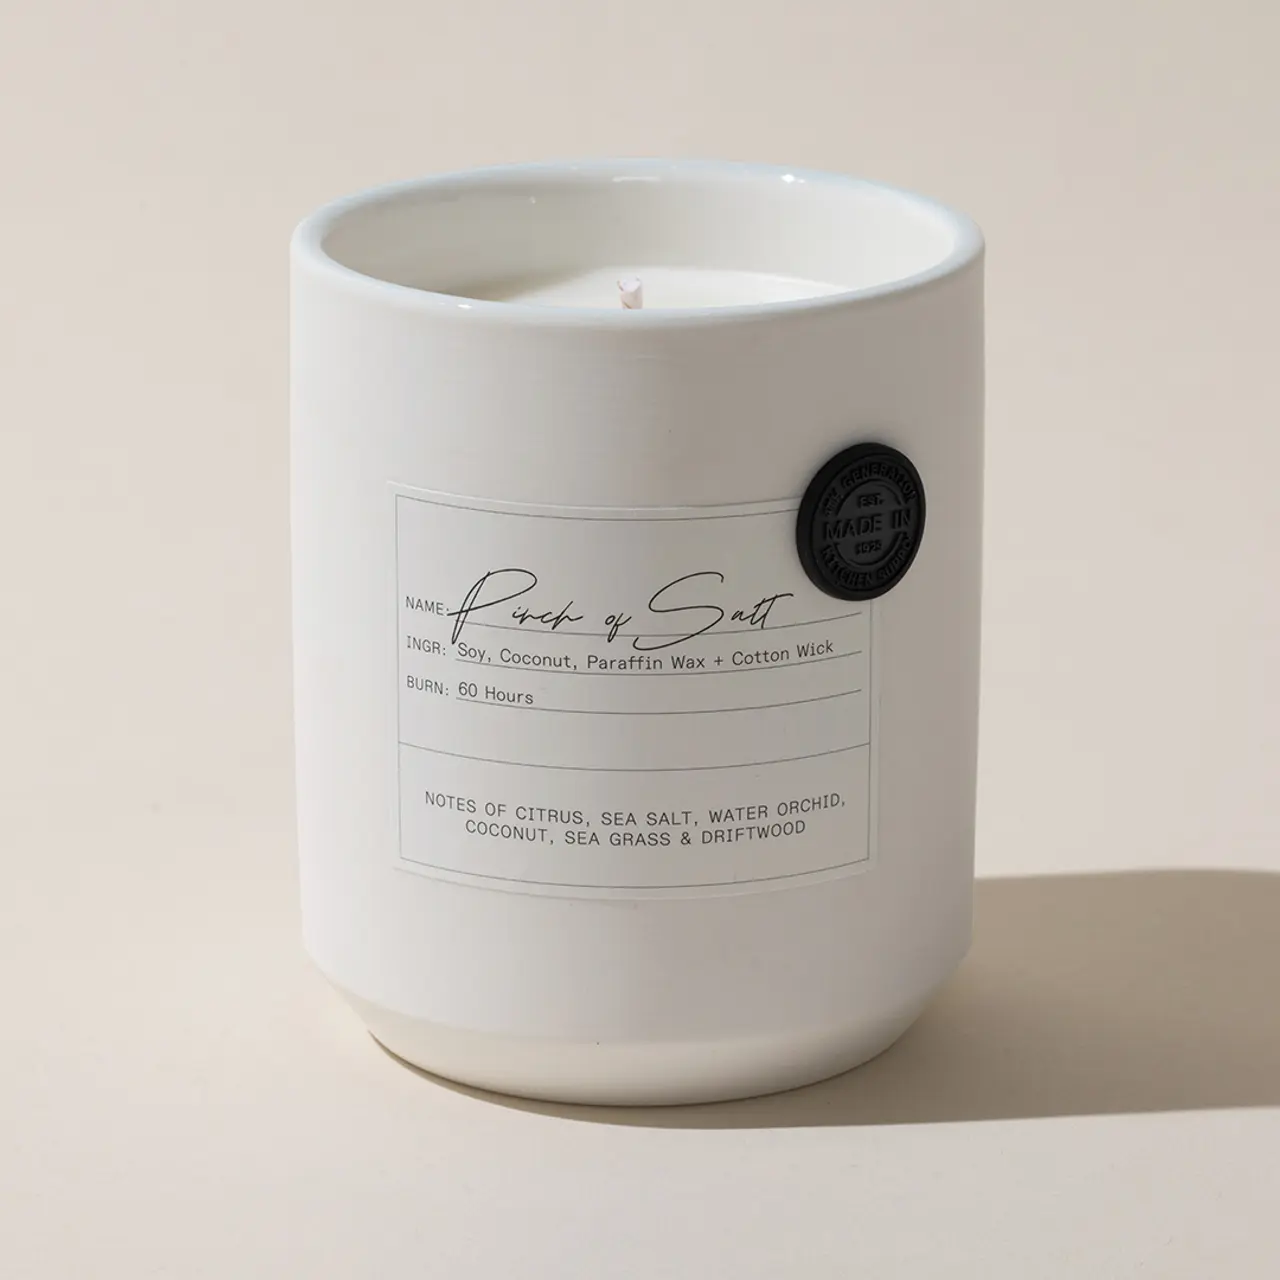 A white scented candle with a label reading "Rock & Salt," detailing ingredients and burn hours, sits against a beige background.